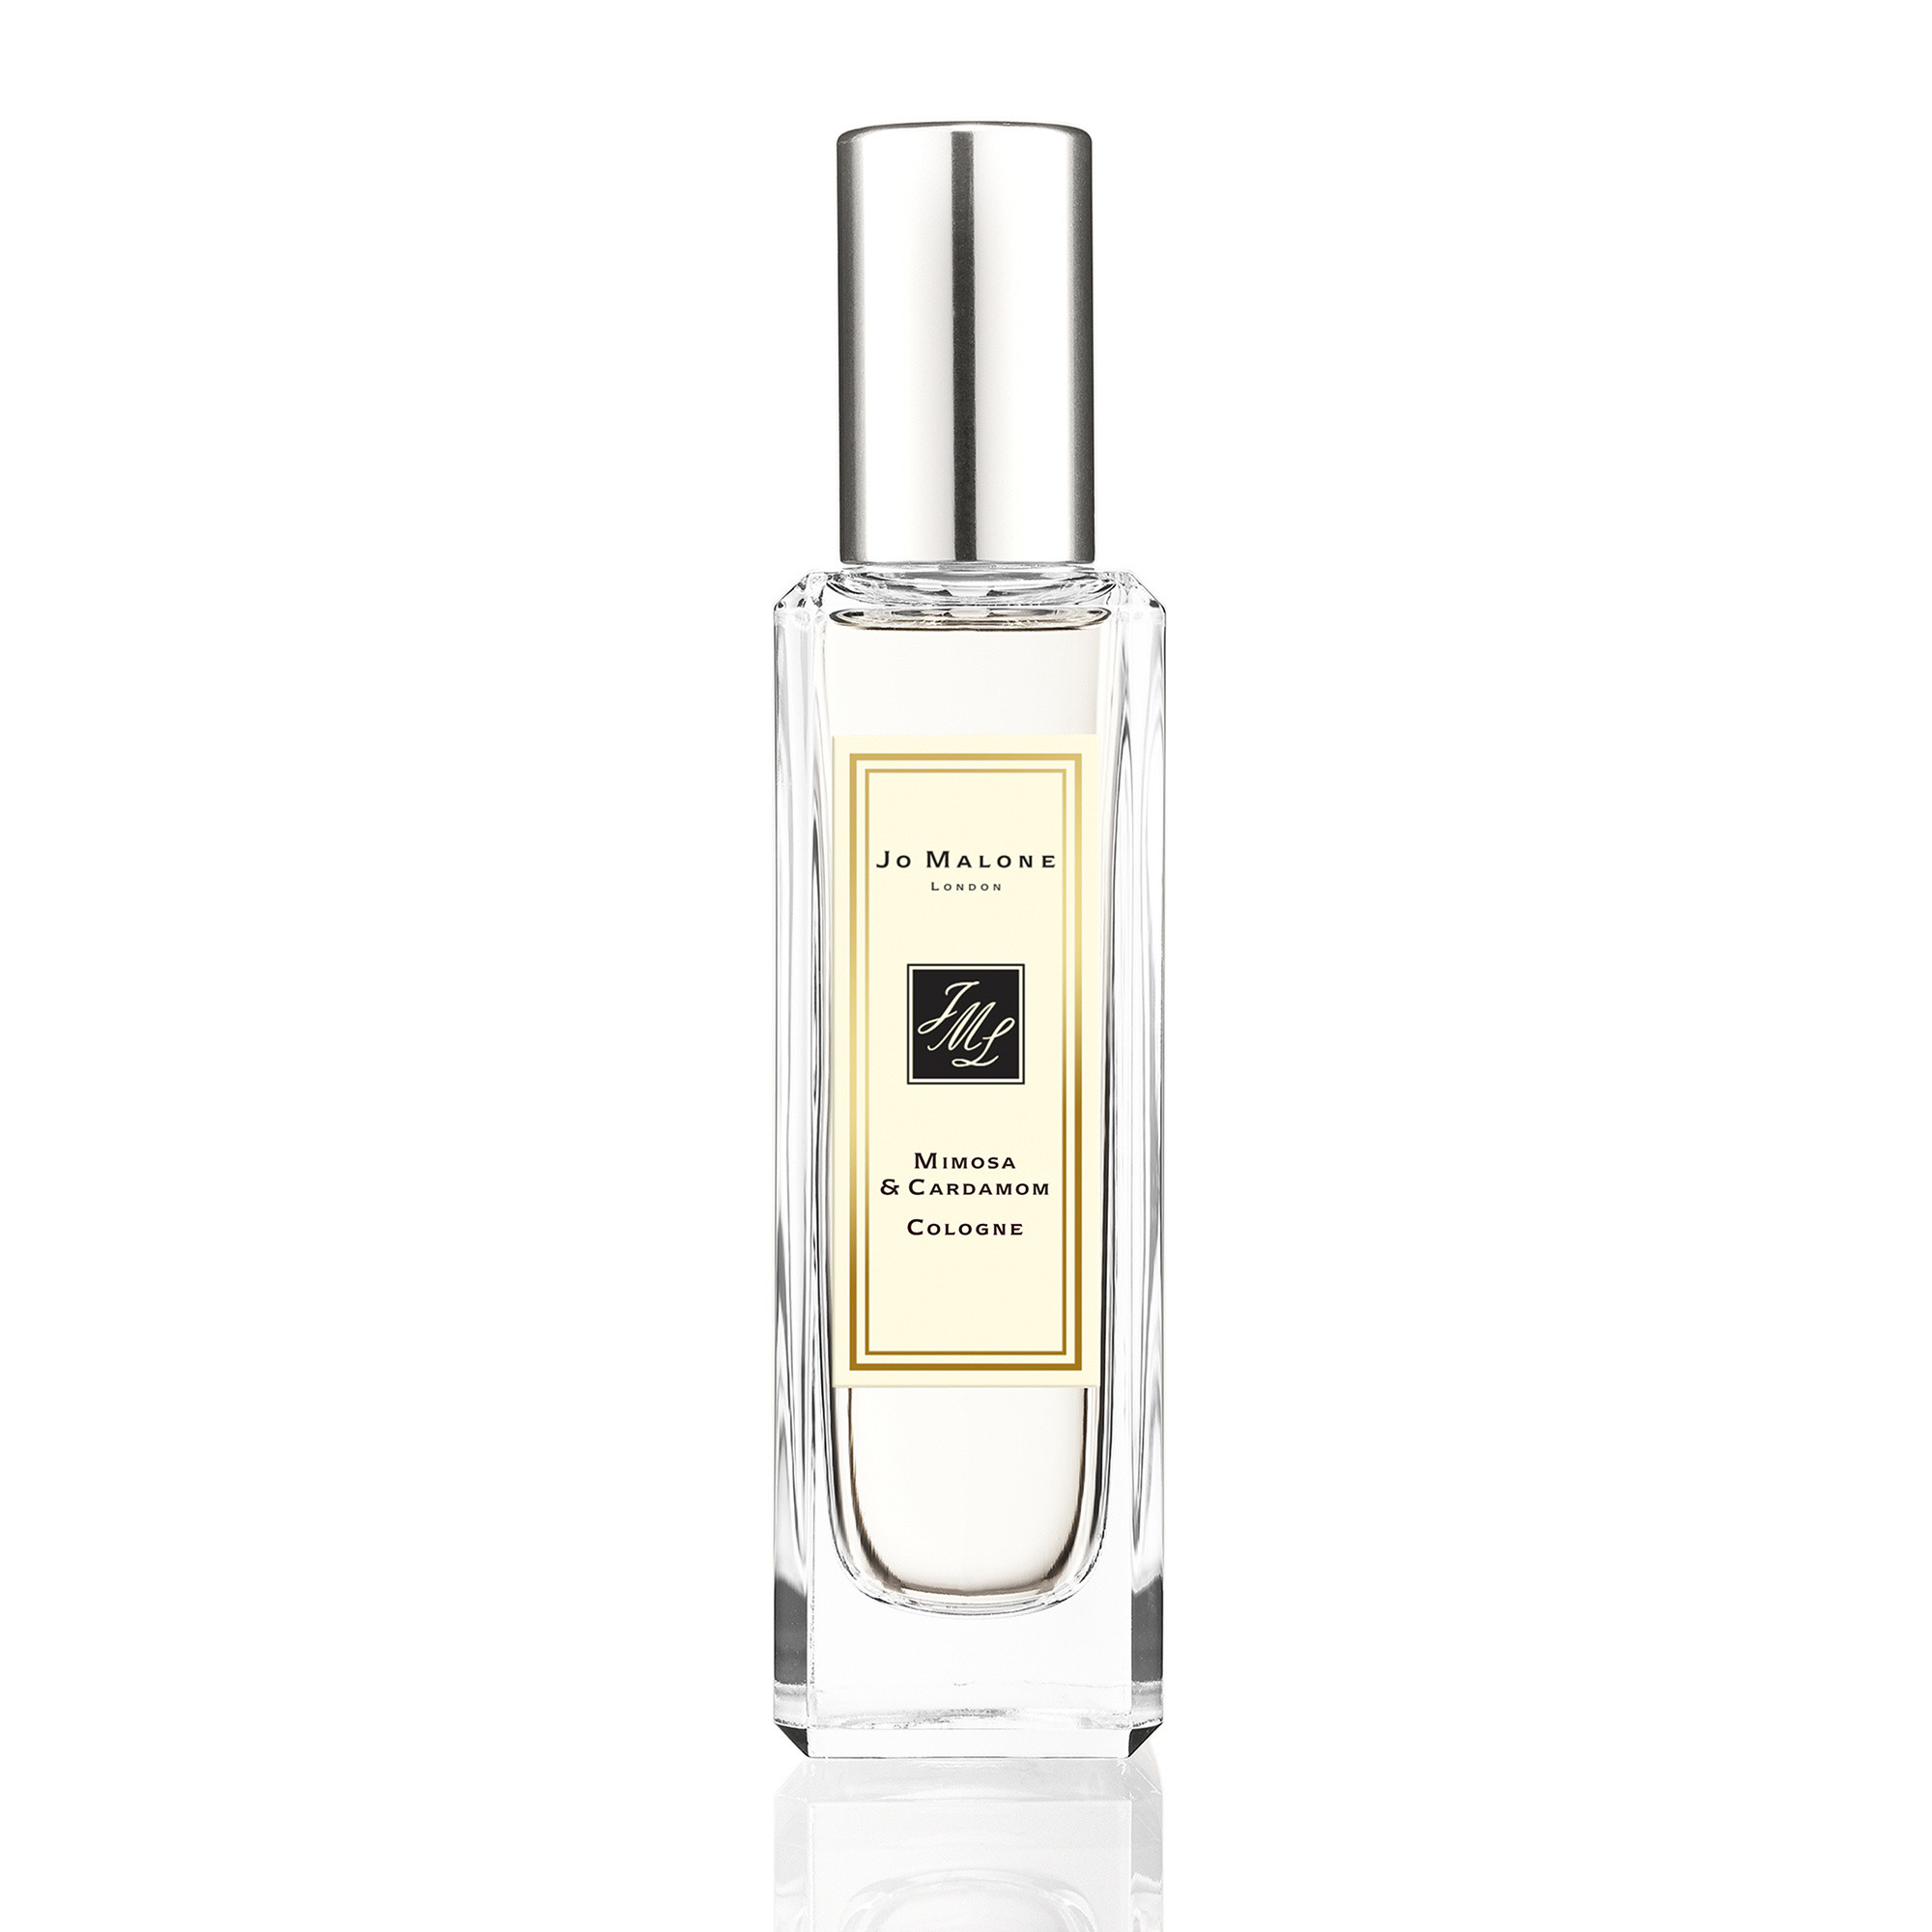 Jo Malone London mimosa & cardamom cologne 30 ml, Beige, large image number 0